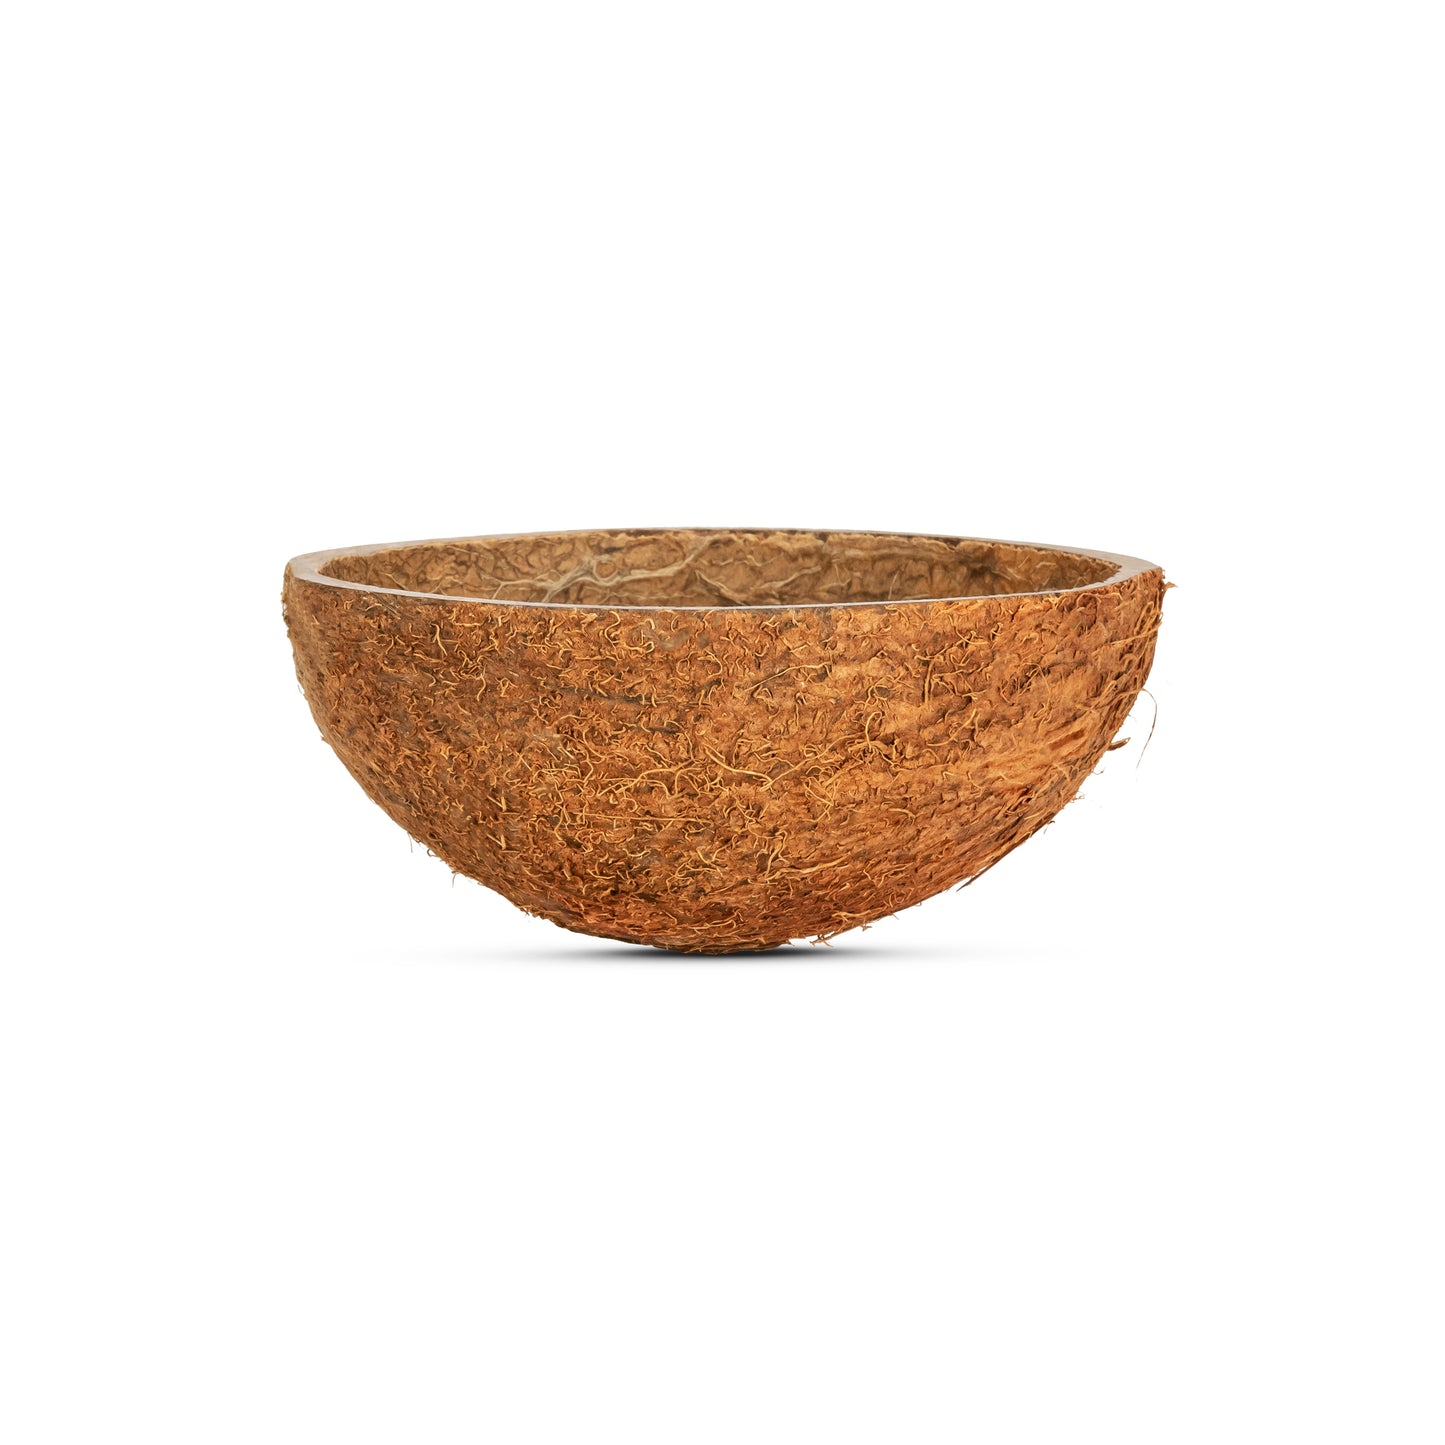 coconut half shell cup oval with fiber